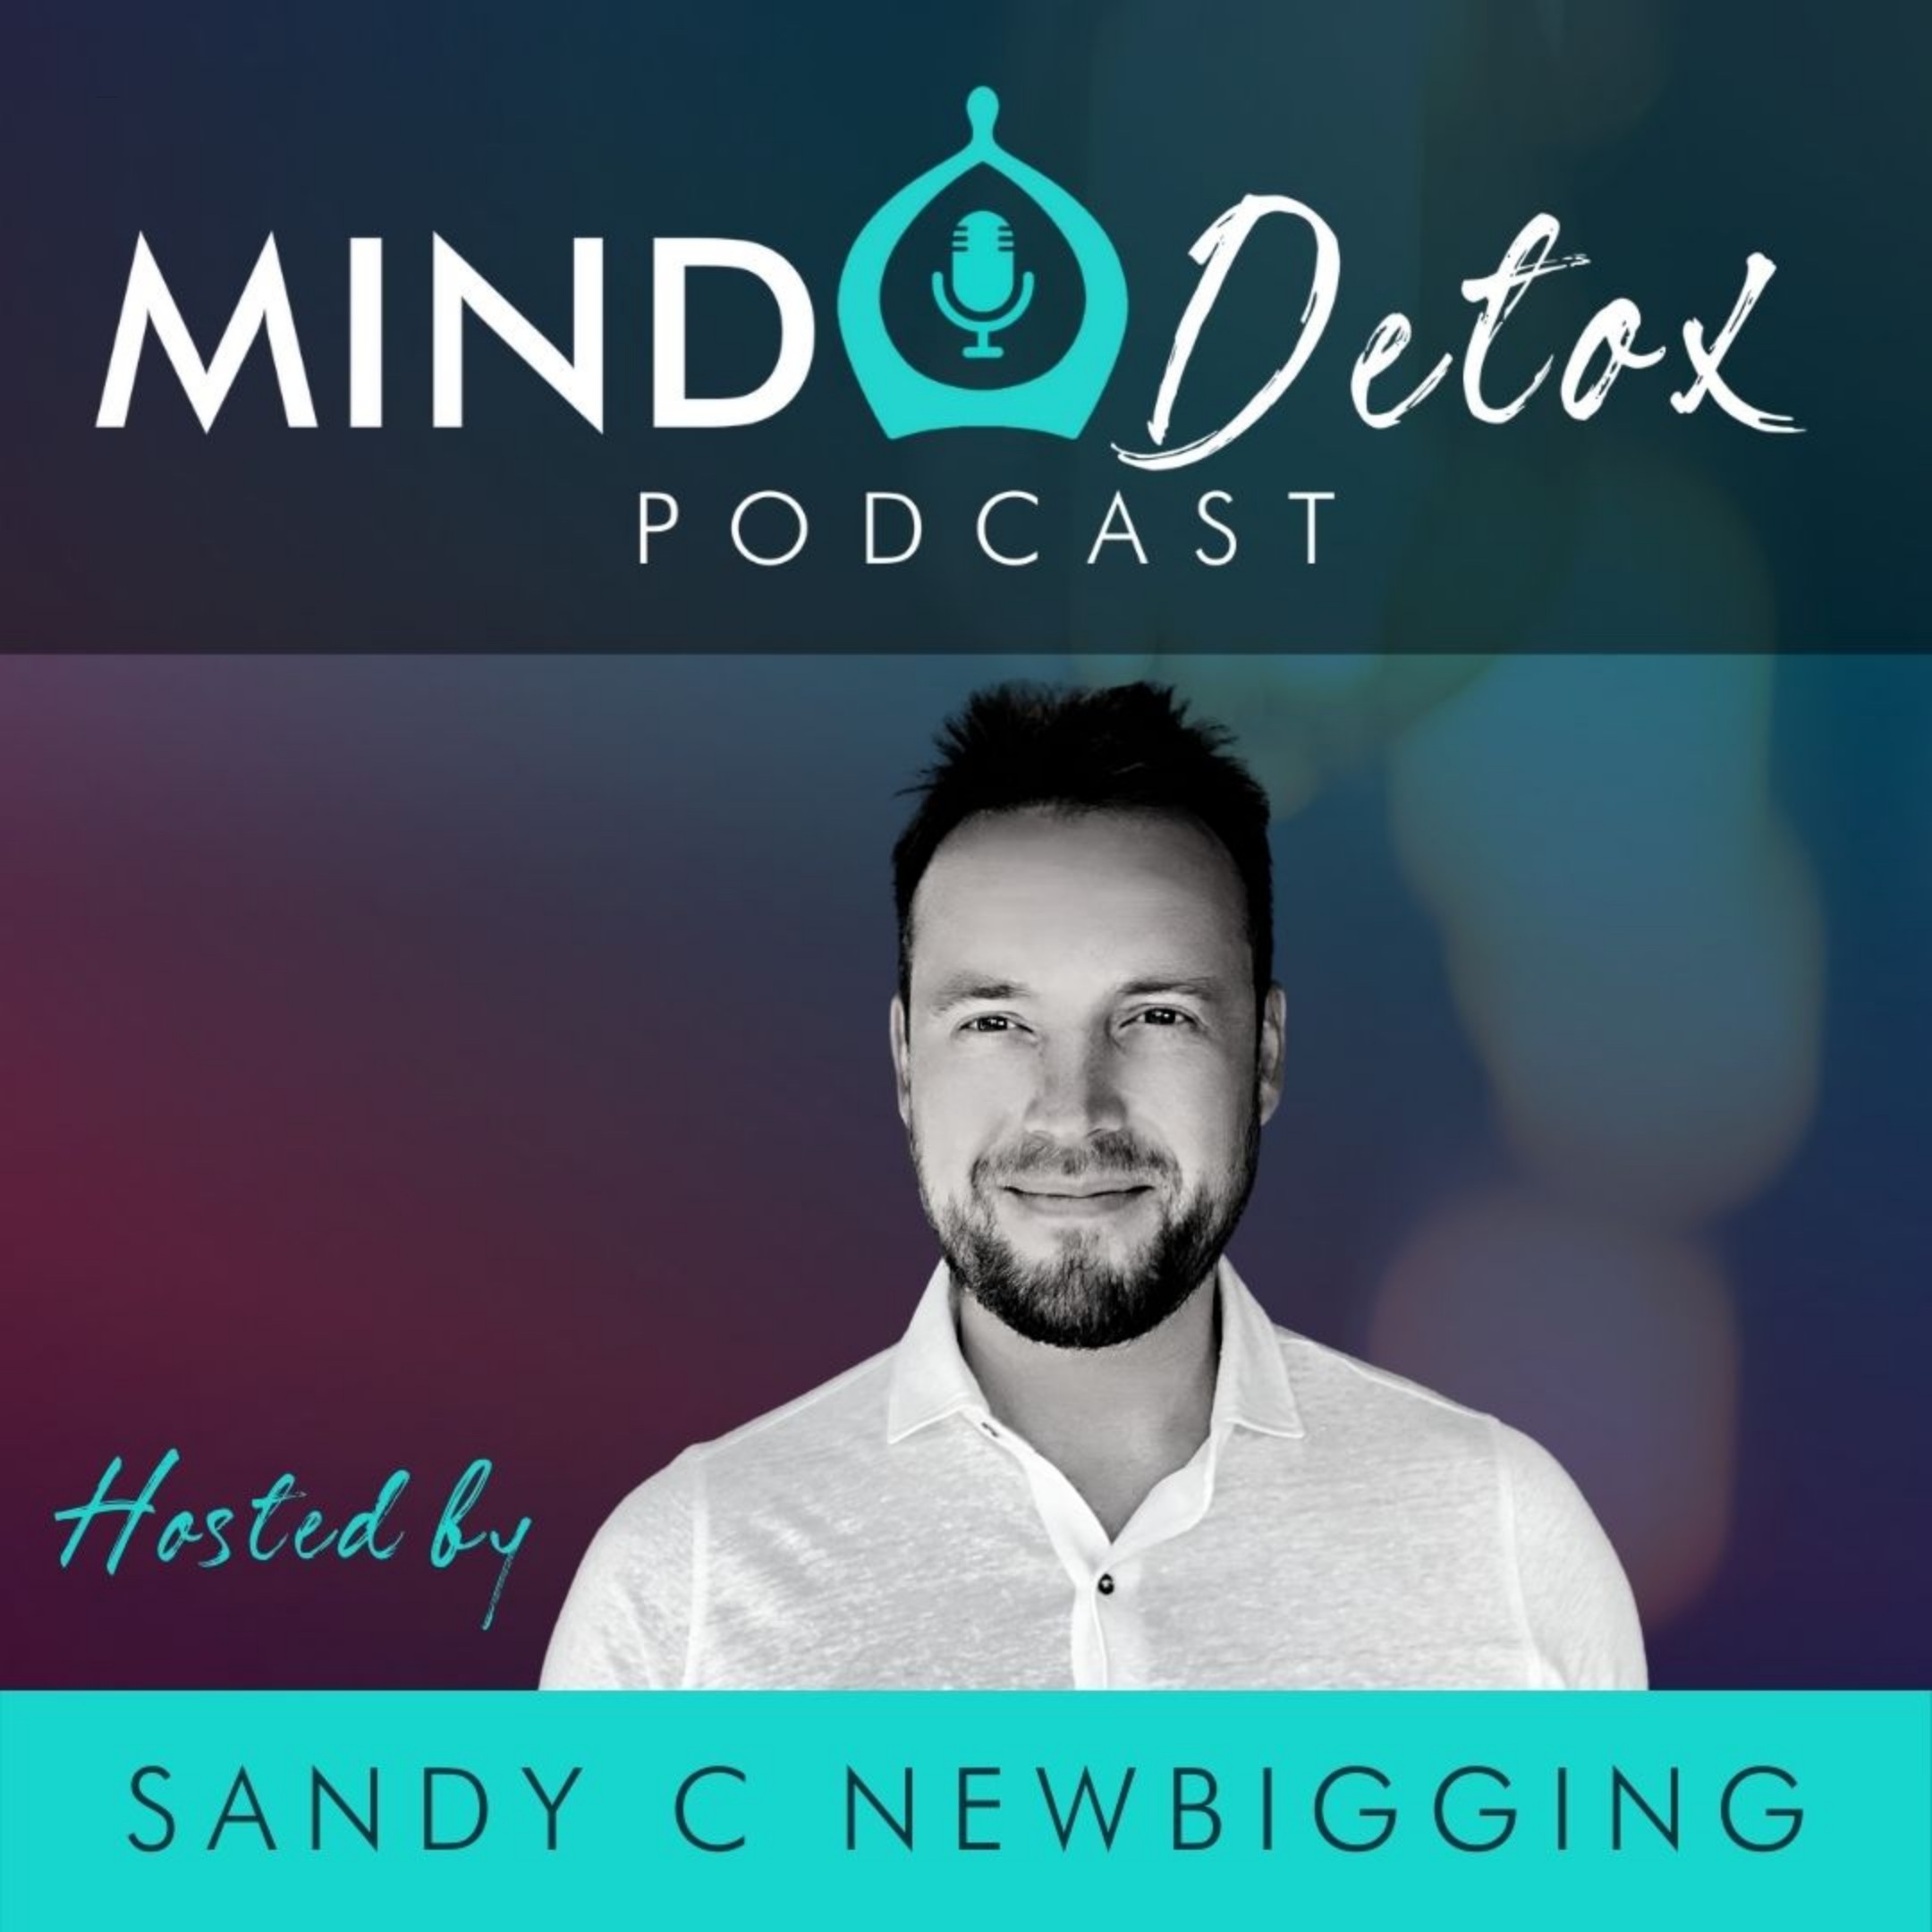 #021 | Against The Odds (A Story About Overcoming Addictions) | With Mahadeva | Mind Detox Podcast